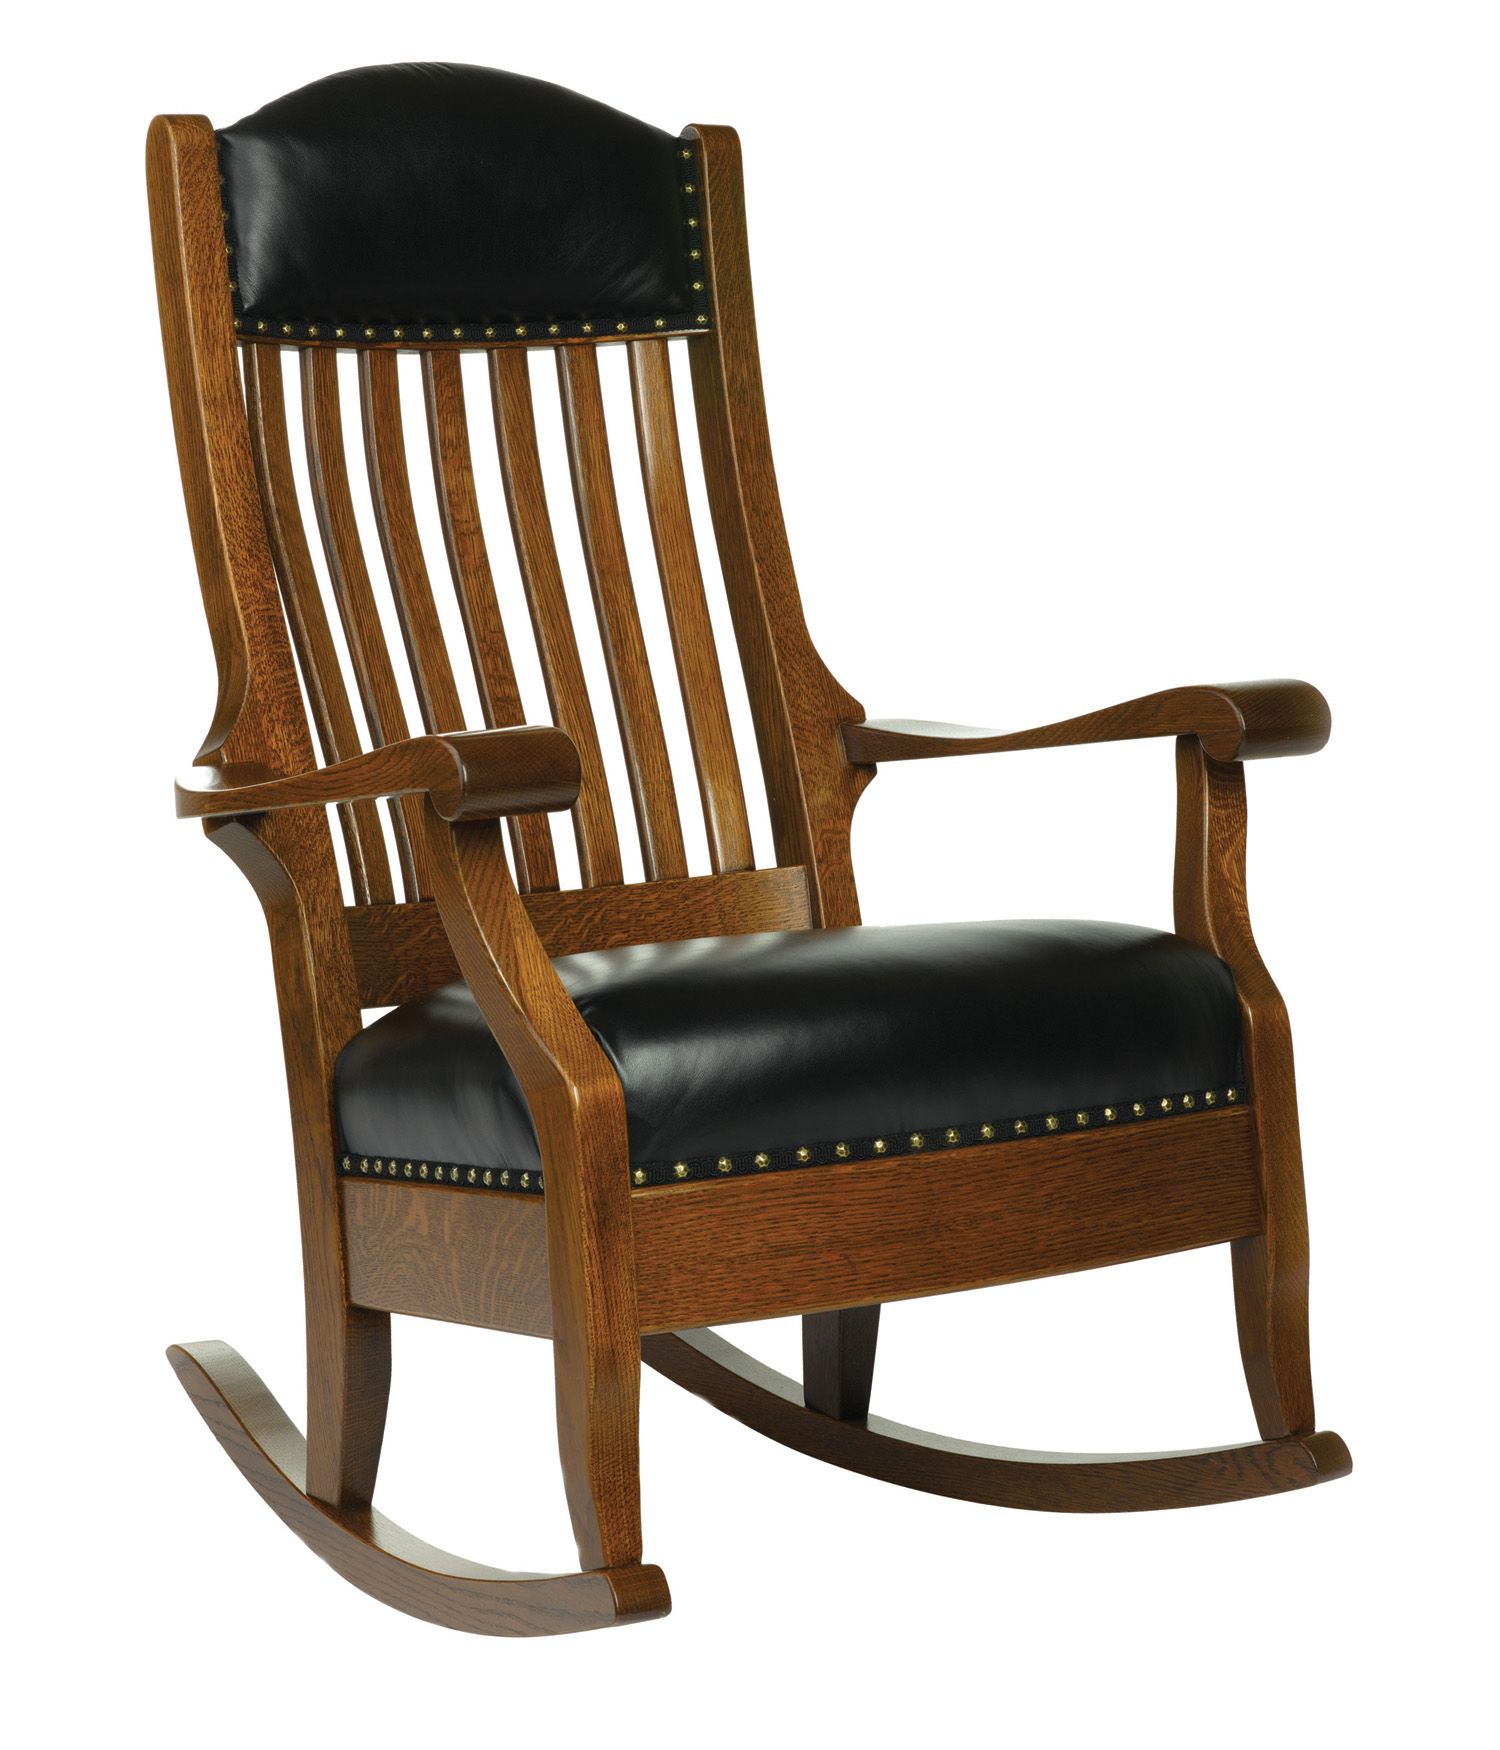 Solid Wood Furniture Chairs